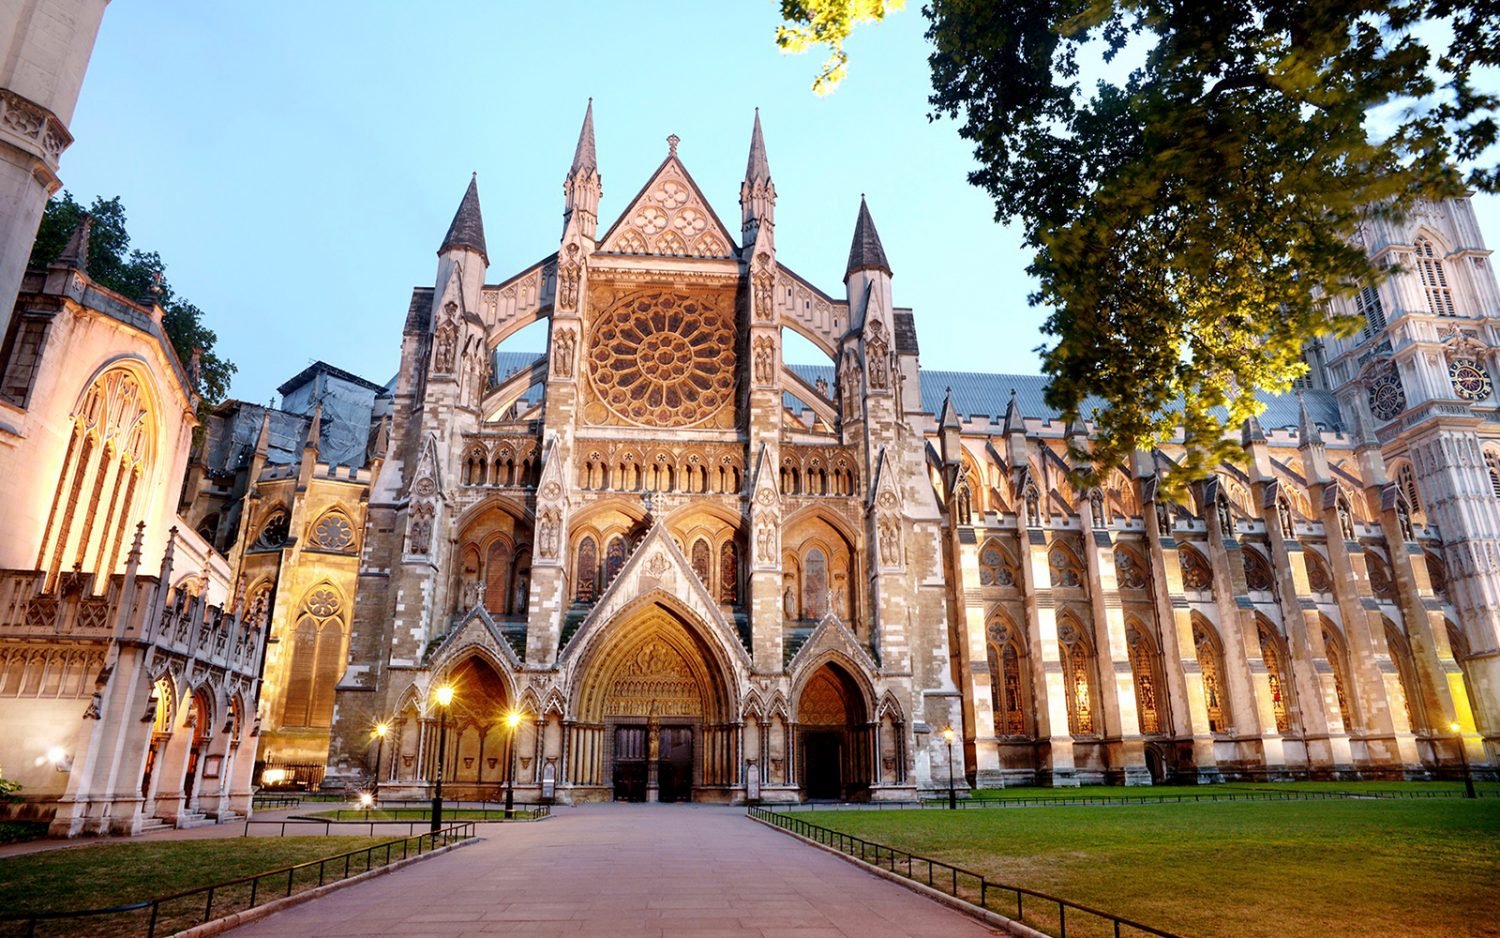 Westminster Abbey Tickets - Only £29.00 - Tickets.co.uk